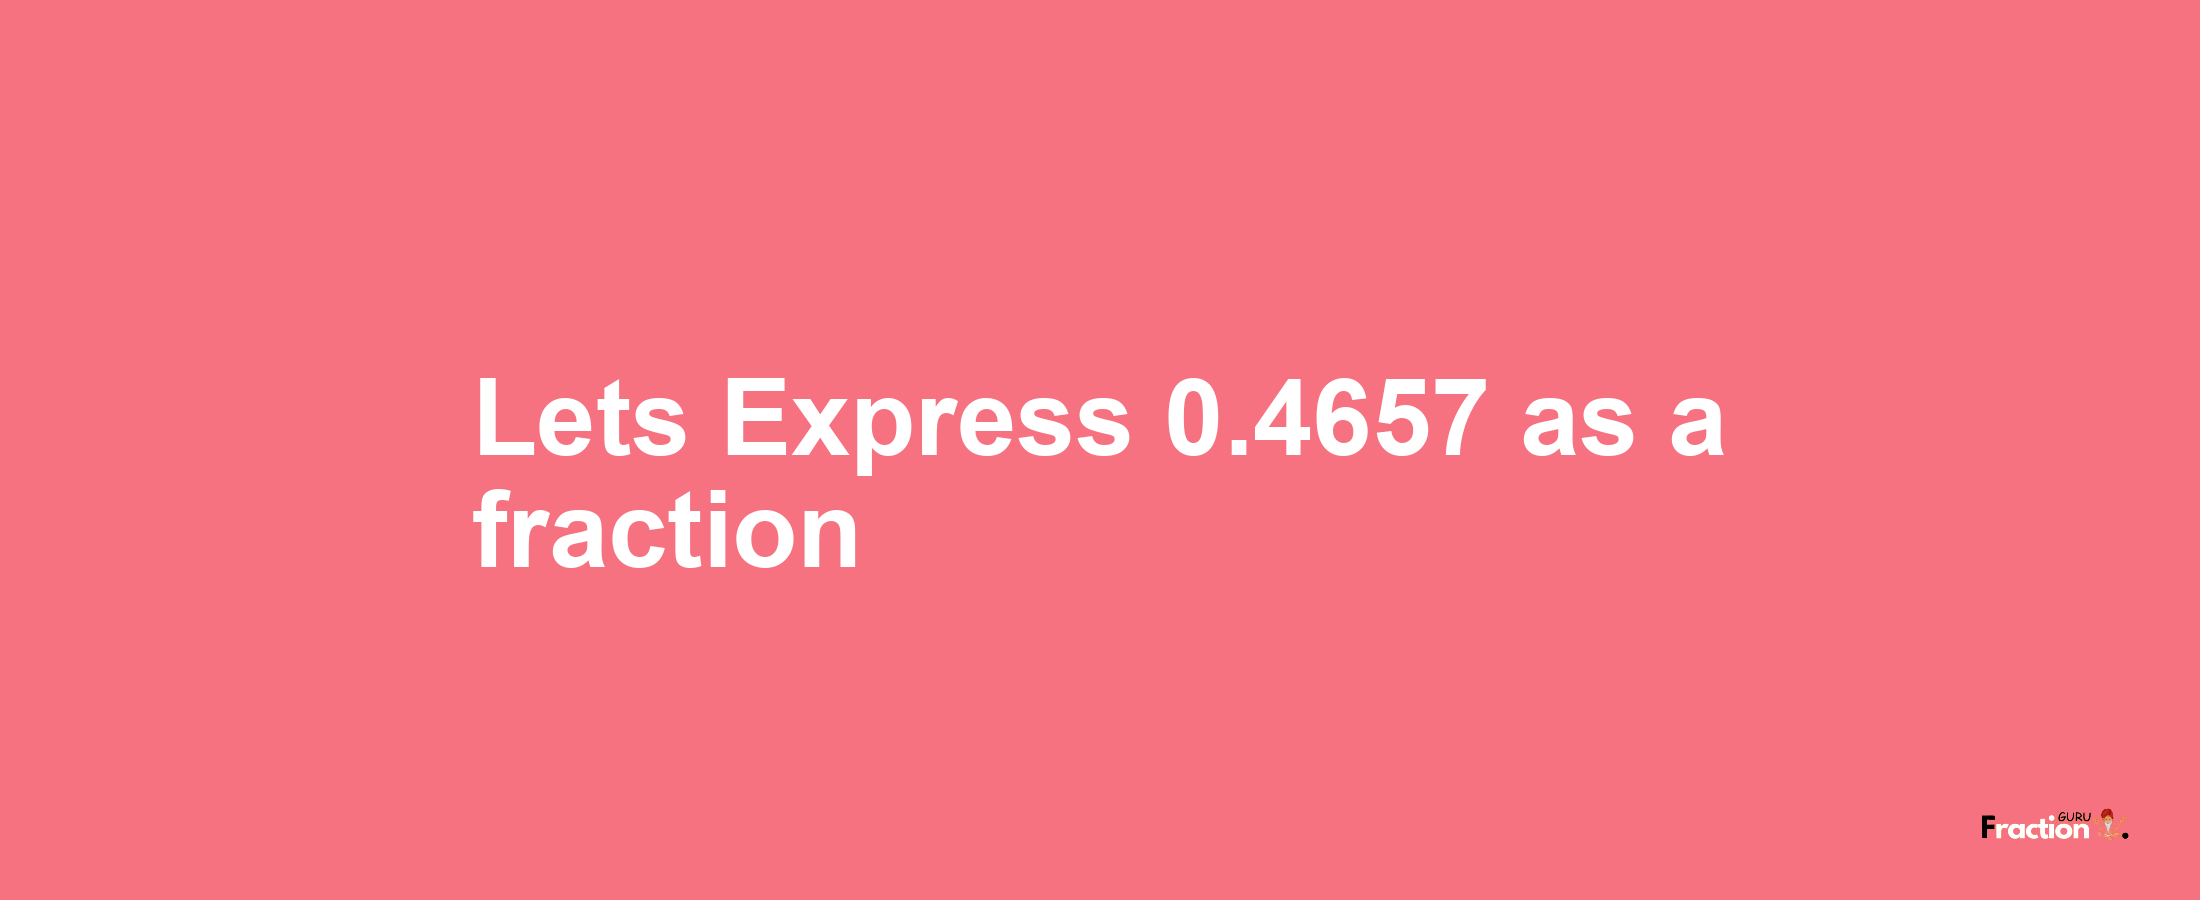 Lets Express 0.4657 as afraction